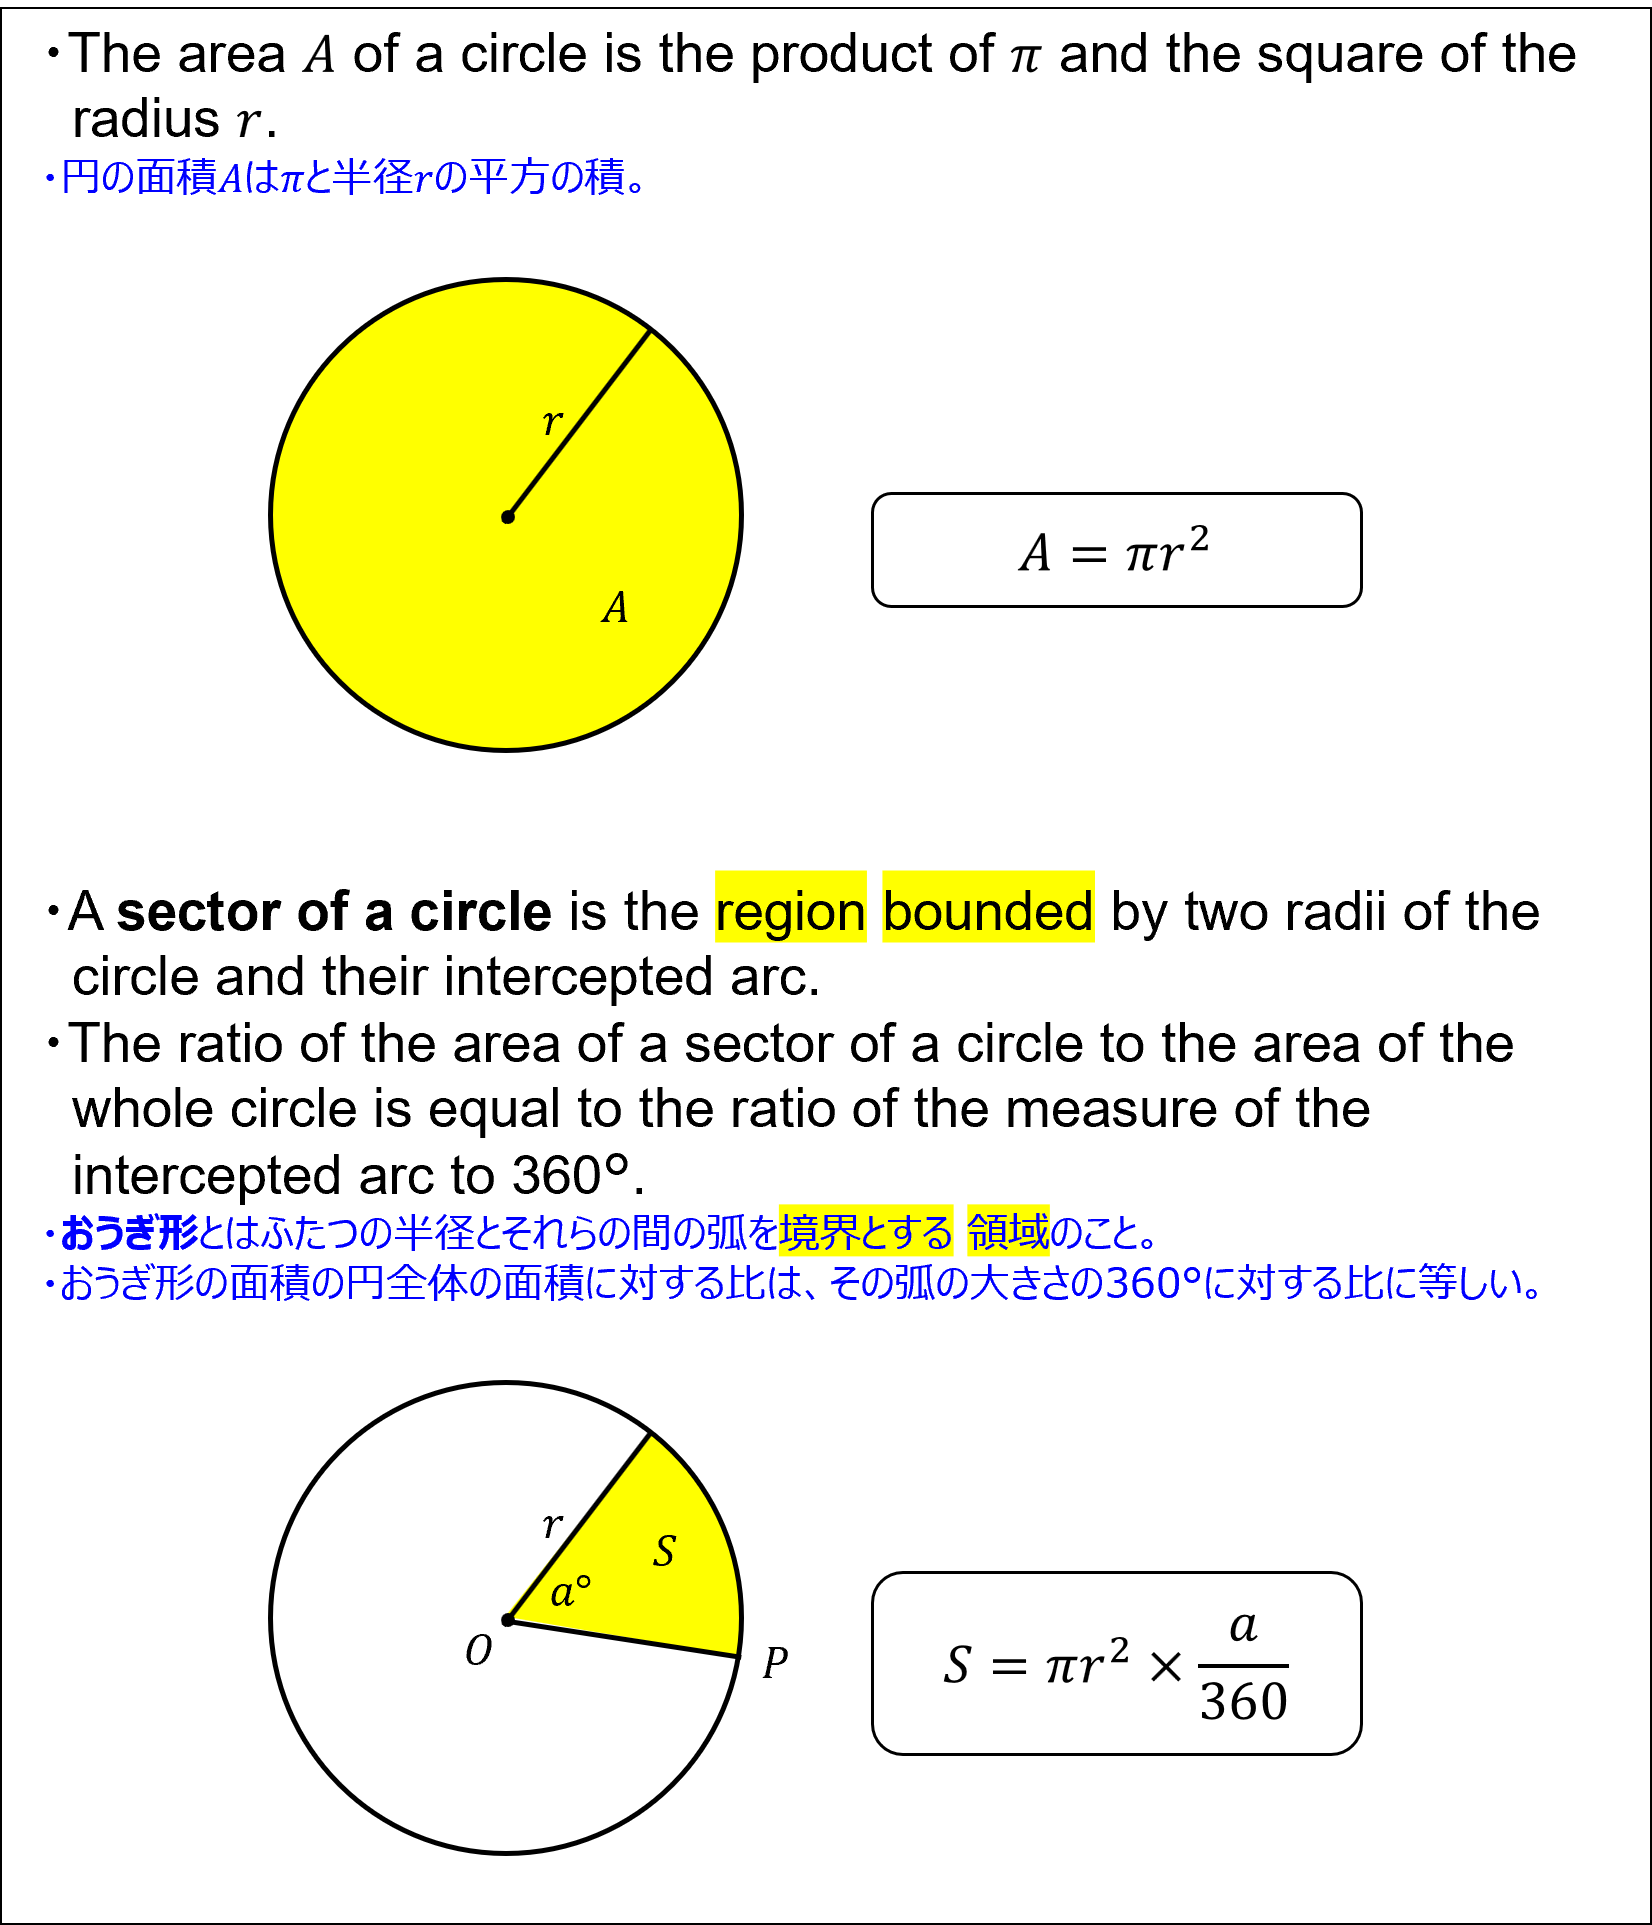 Explaining how to find the area of a circle and a sector